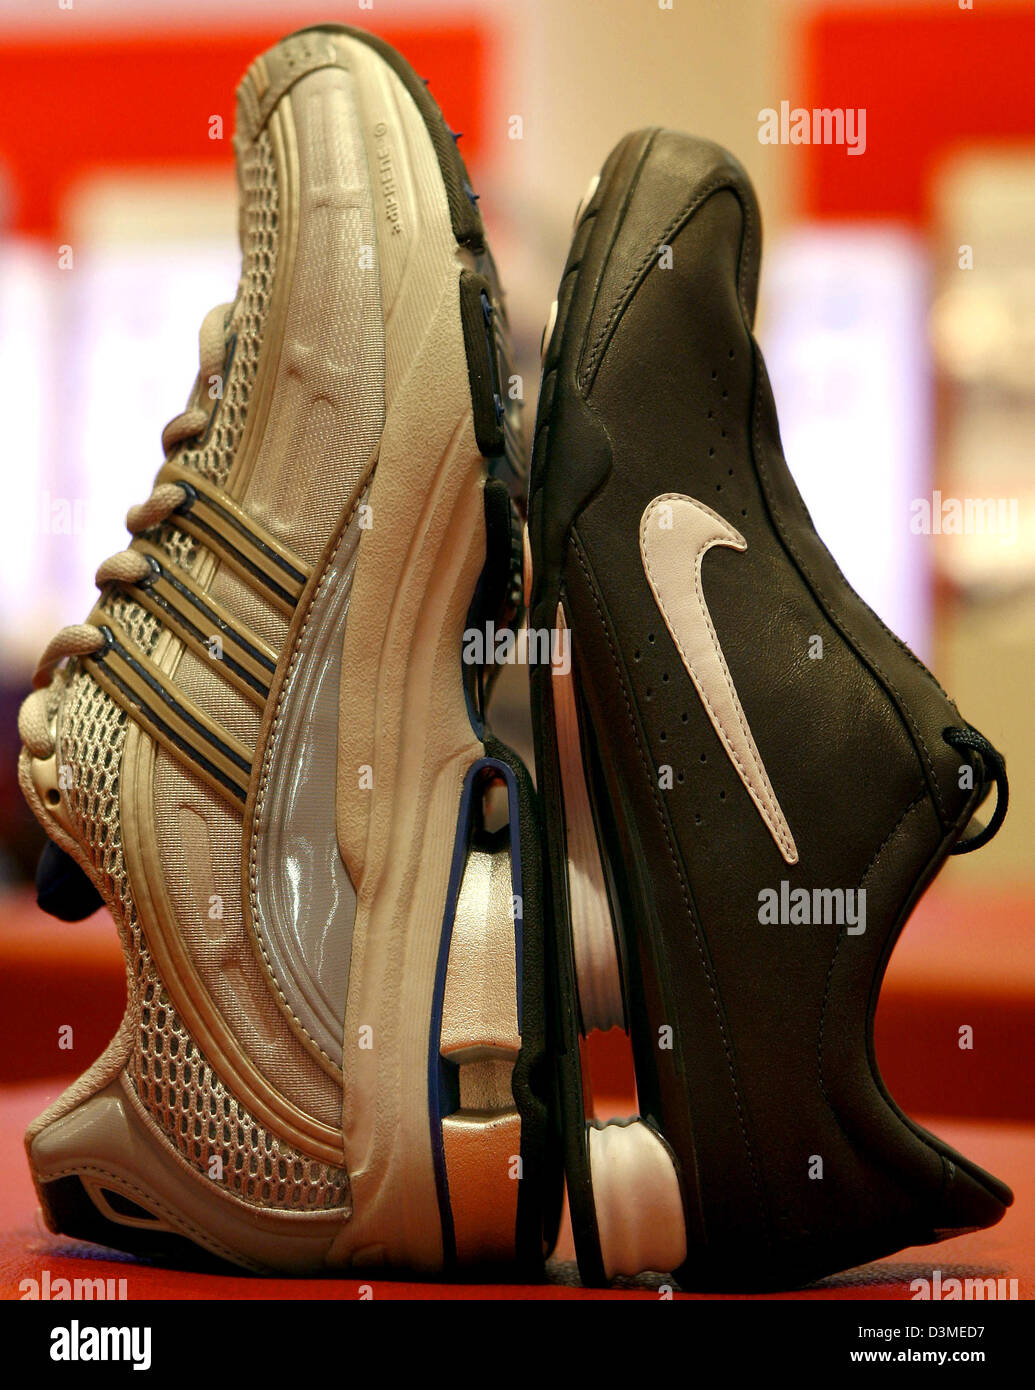 A model with 'SHOX Cushioning Technology' by Nike (R) stands on a model  with the 'a3' cushioning system by adidas in Nuremberg, Germany, Friday 17  February 2006. Nike claimed a patent infringement